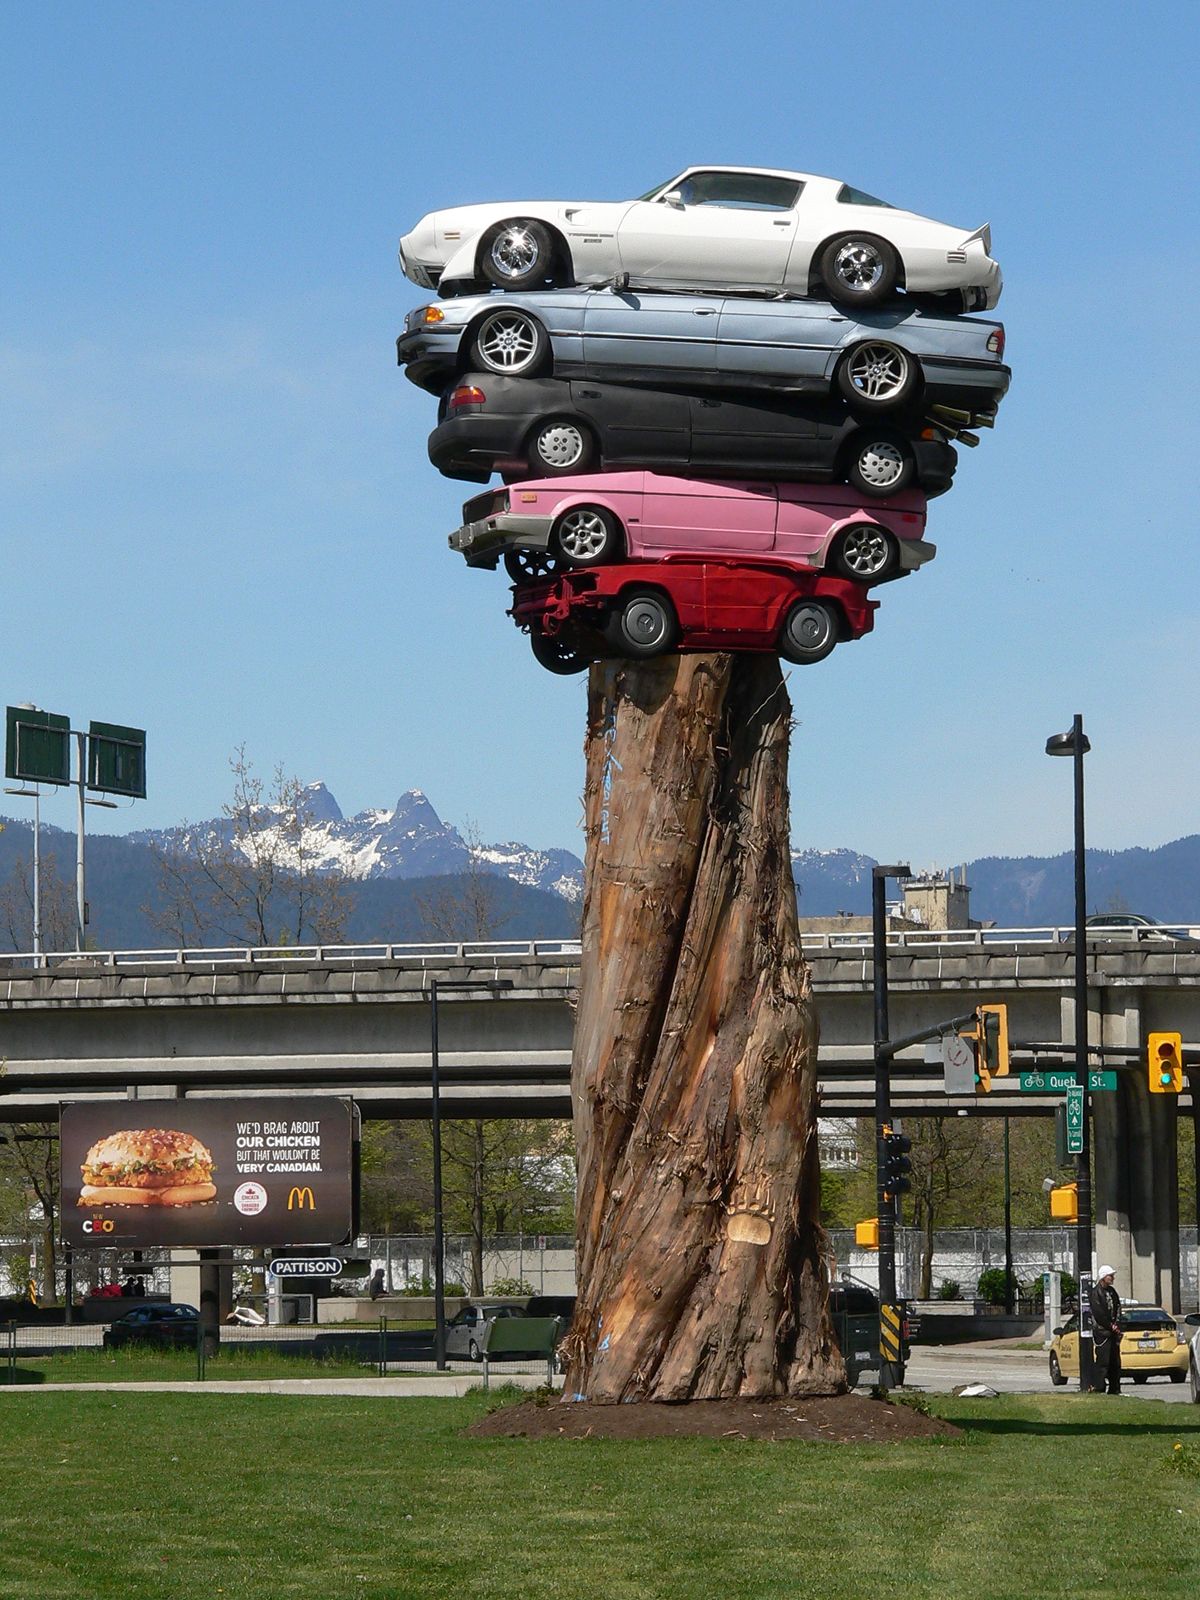 Trans Am Totem (2014), by Marcus Bowcott and Helene Aspinall 